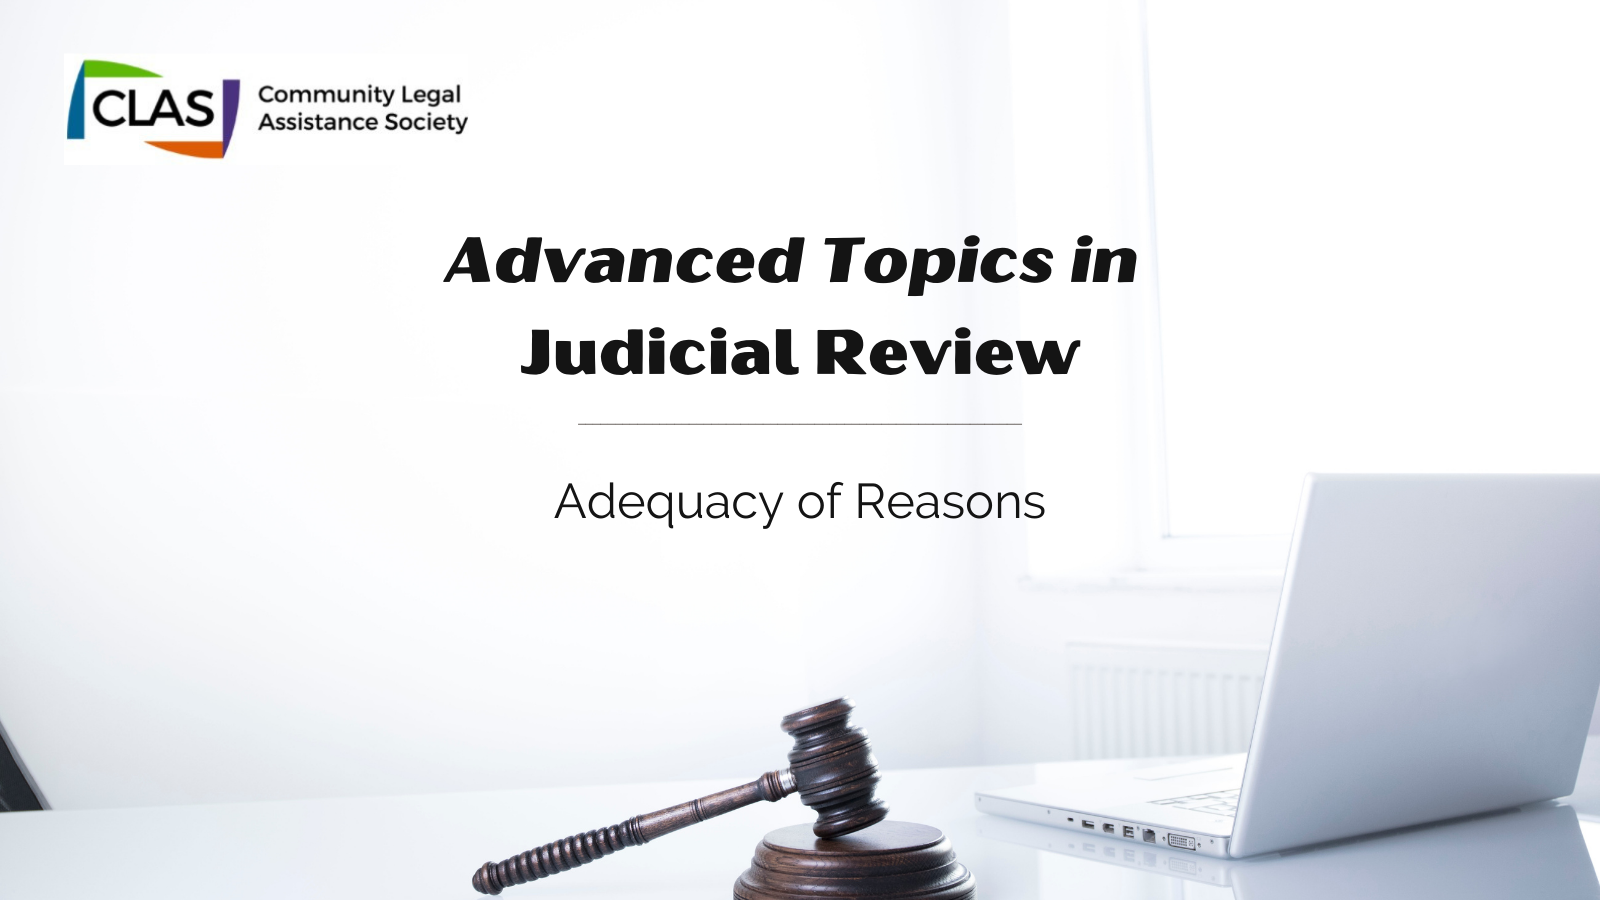 write an essay on judicial review of industrial awards